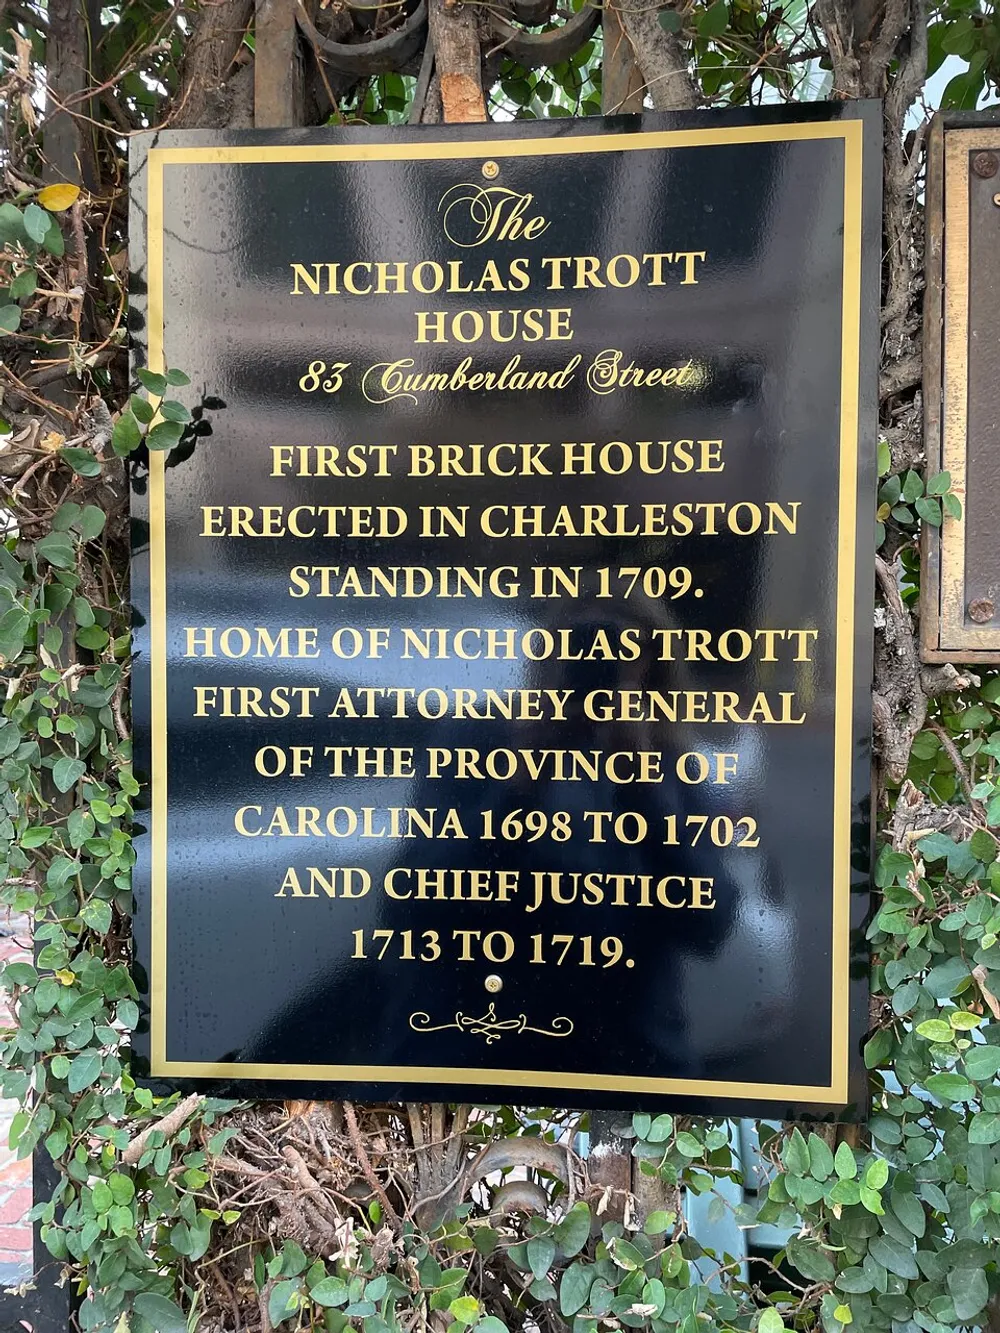 The image shows a commemorative plaque for the Nicholas Trott House in Charleston indicating it as the first brick house erected in the city in 1709 and the home of Nicholas Trott who was the Attorney General and Chief Justice of the Province of Carolina